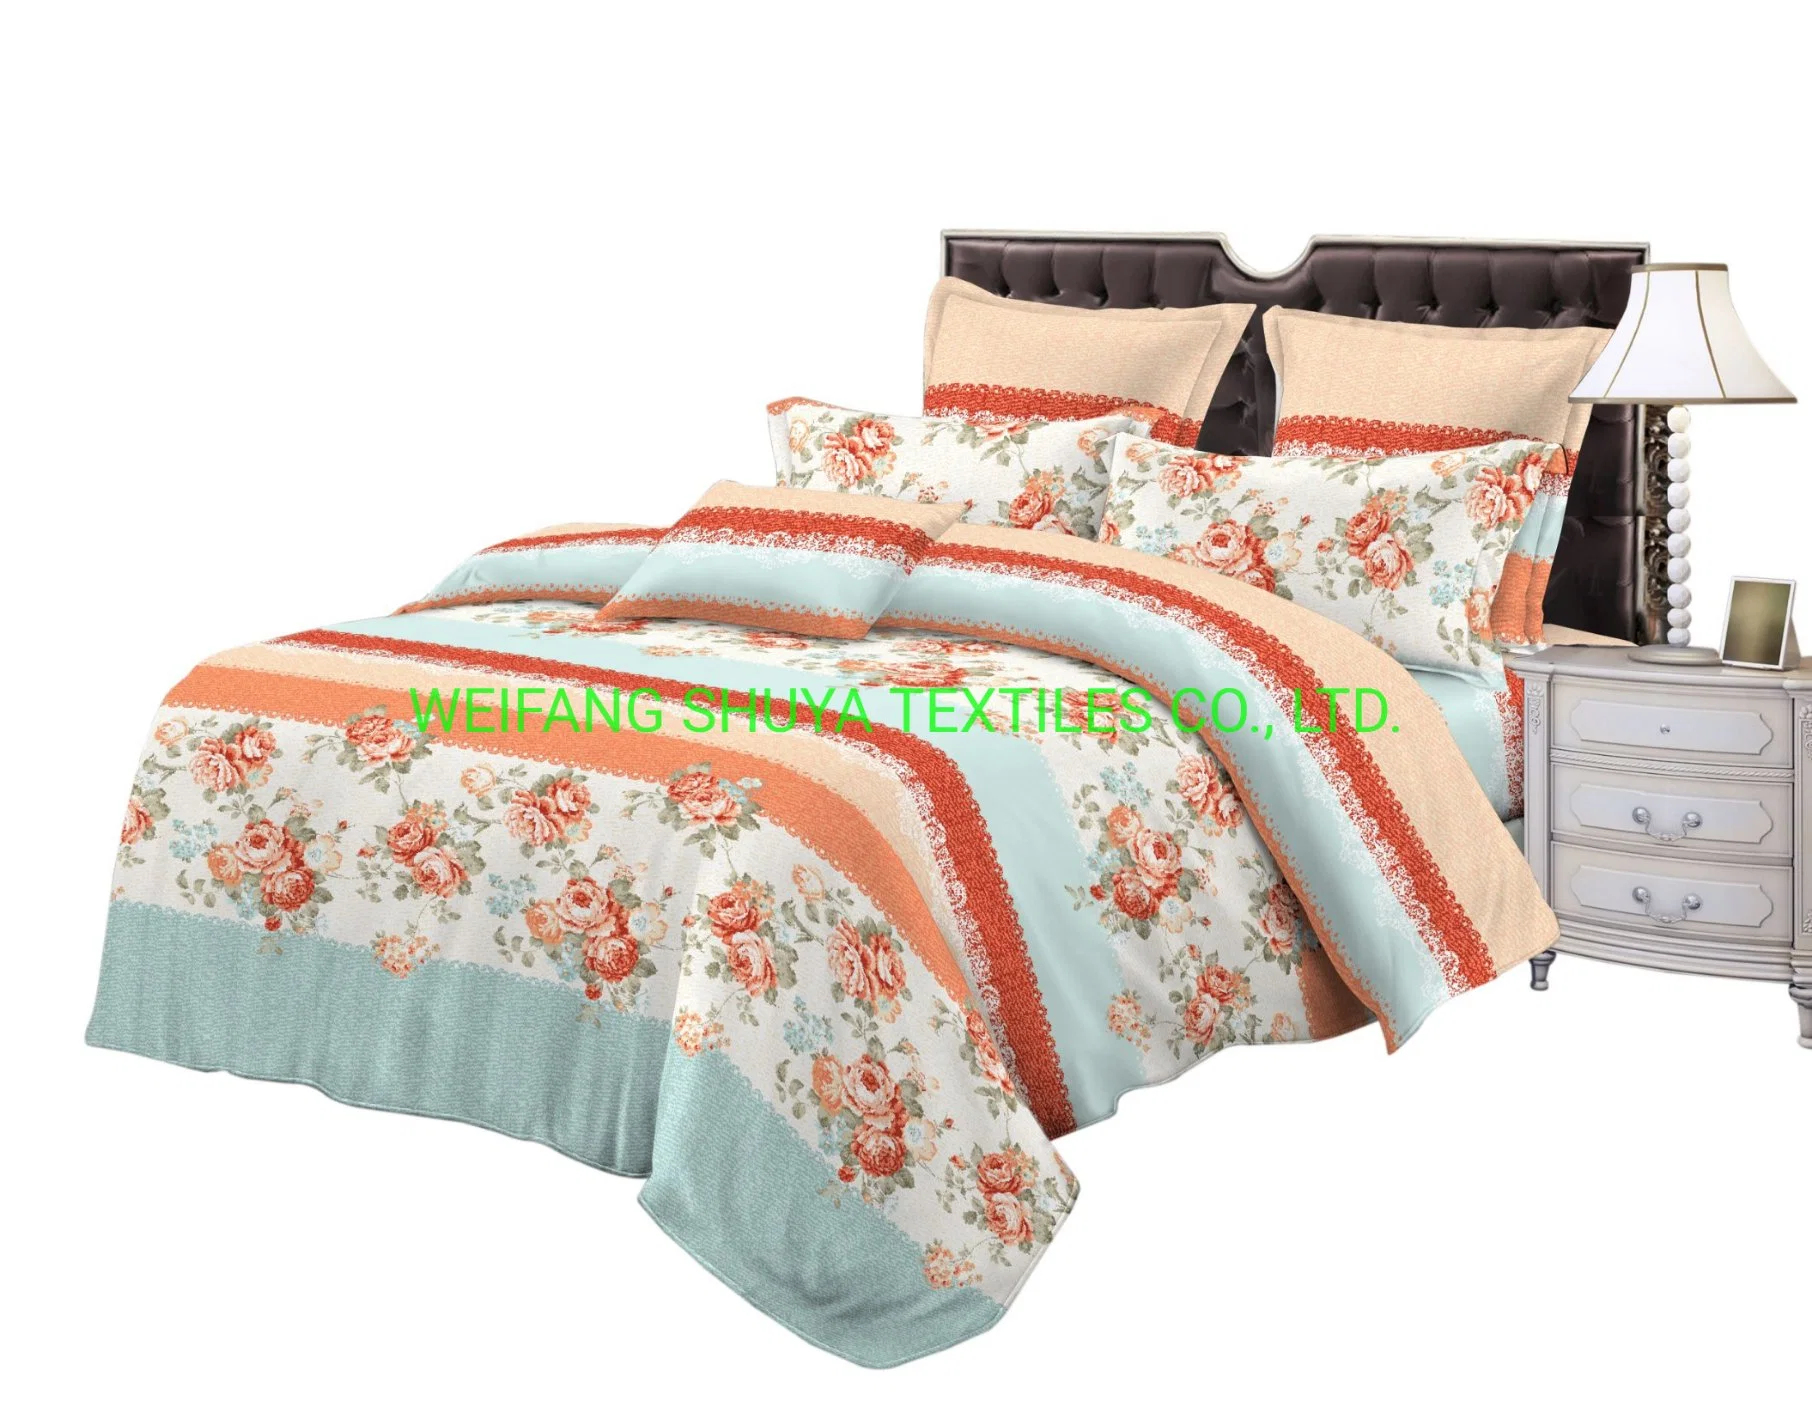 Bedding 100% Polyester Printed Fabric Can Be Customized 3 Sets